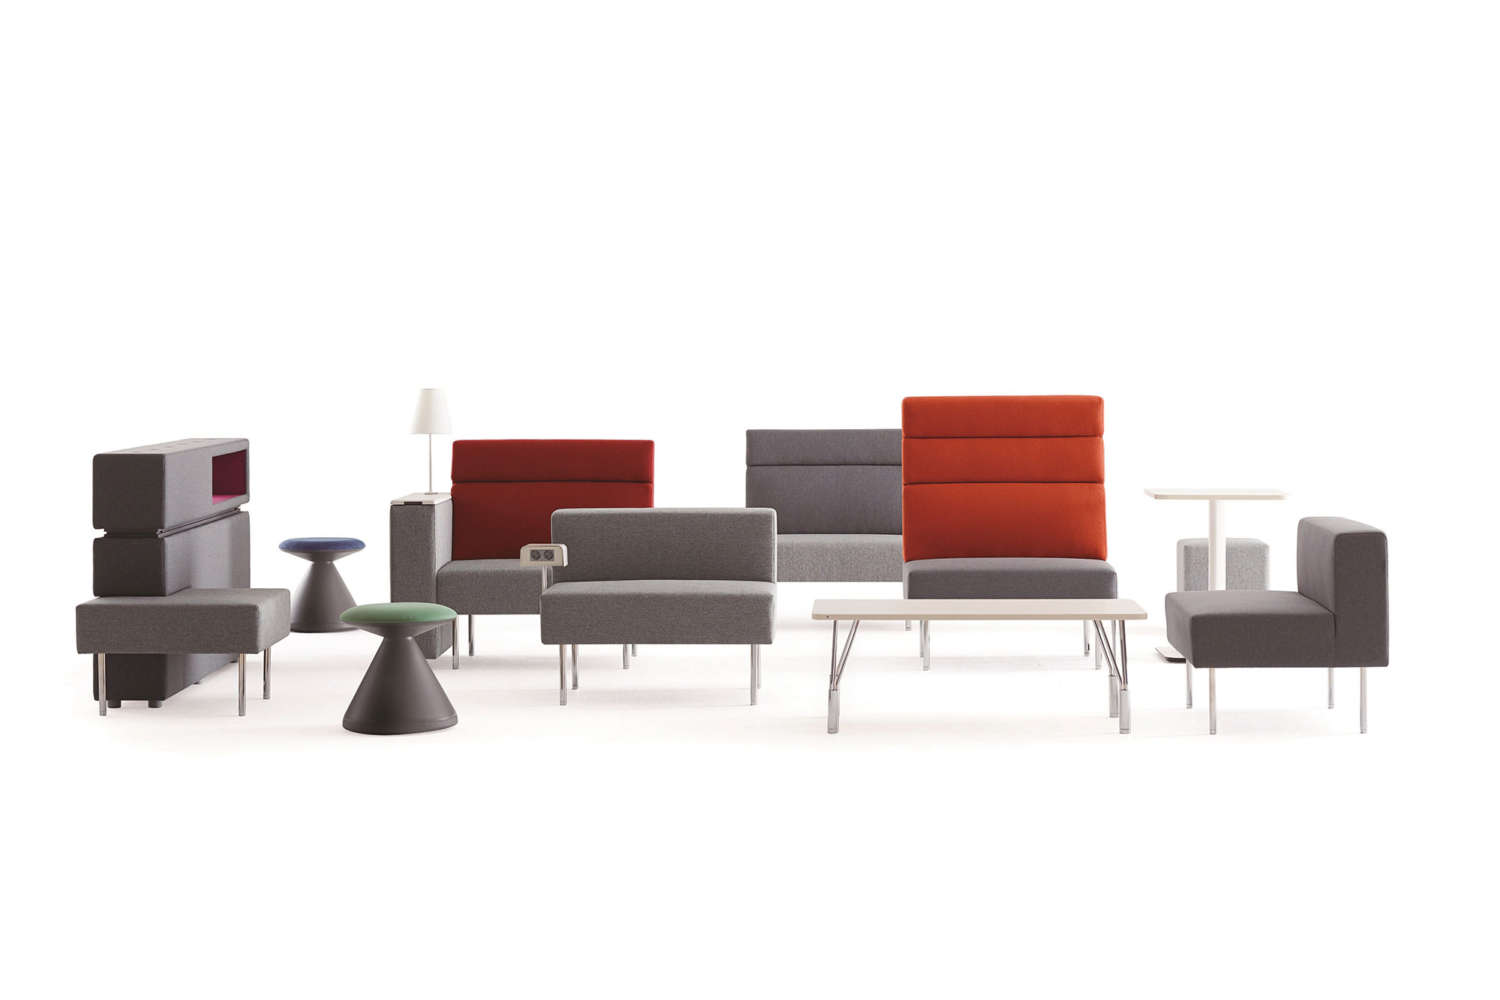 Commercial seating and stools by Square